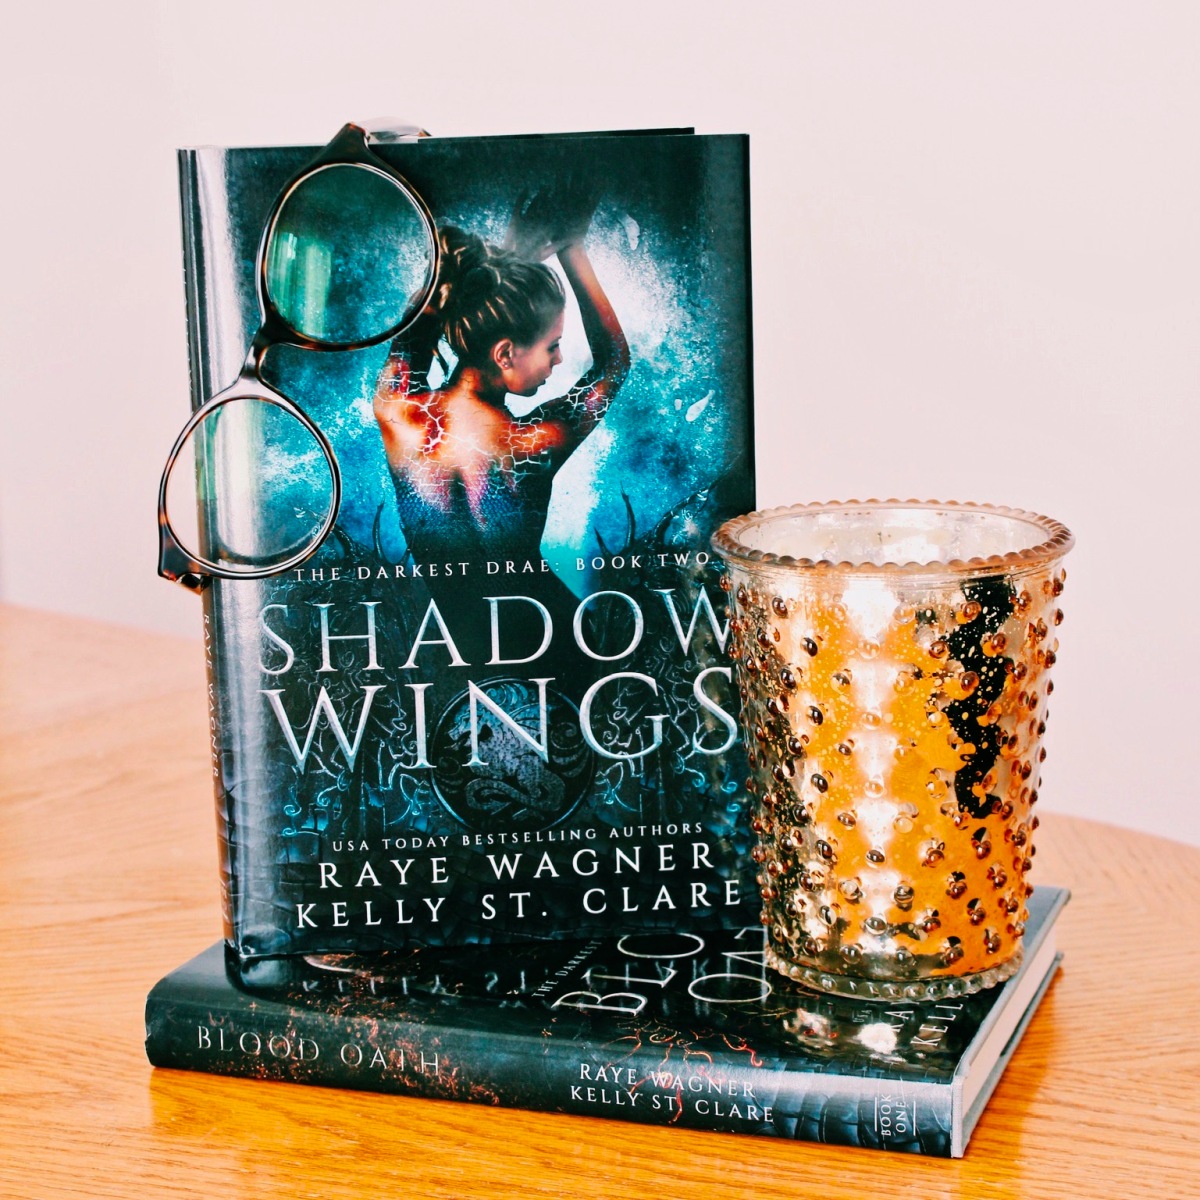 Raye Wagner & Kelly St. Clare – Shadow Wings (The Darkest Drae Book 2)